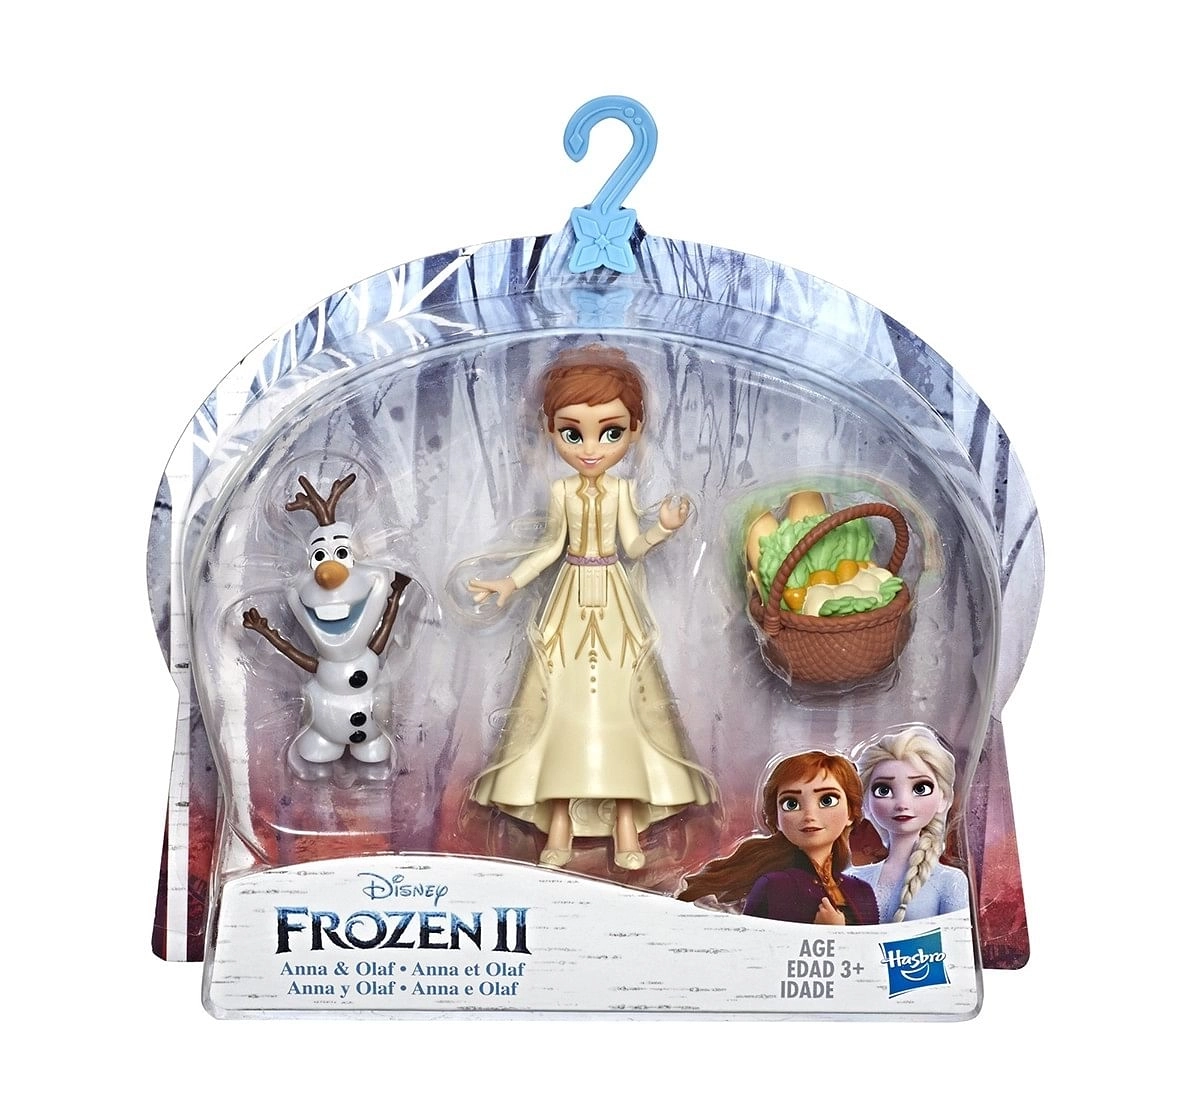 Disney Frozen Anna and Olaf Small Dolls With Basket Accessory, Inspired by the Disney Frozen 2 Movie  Dolls & Accessories for age 3Y+ 